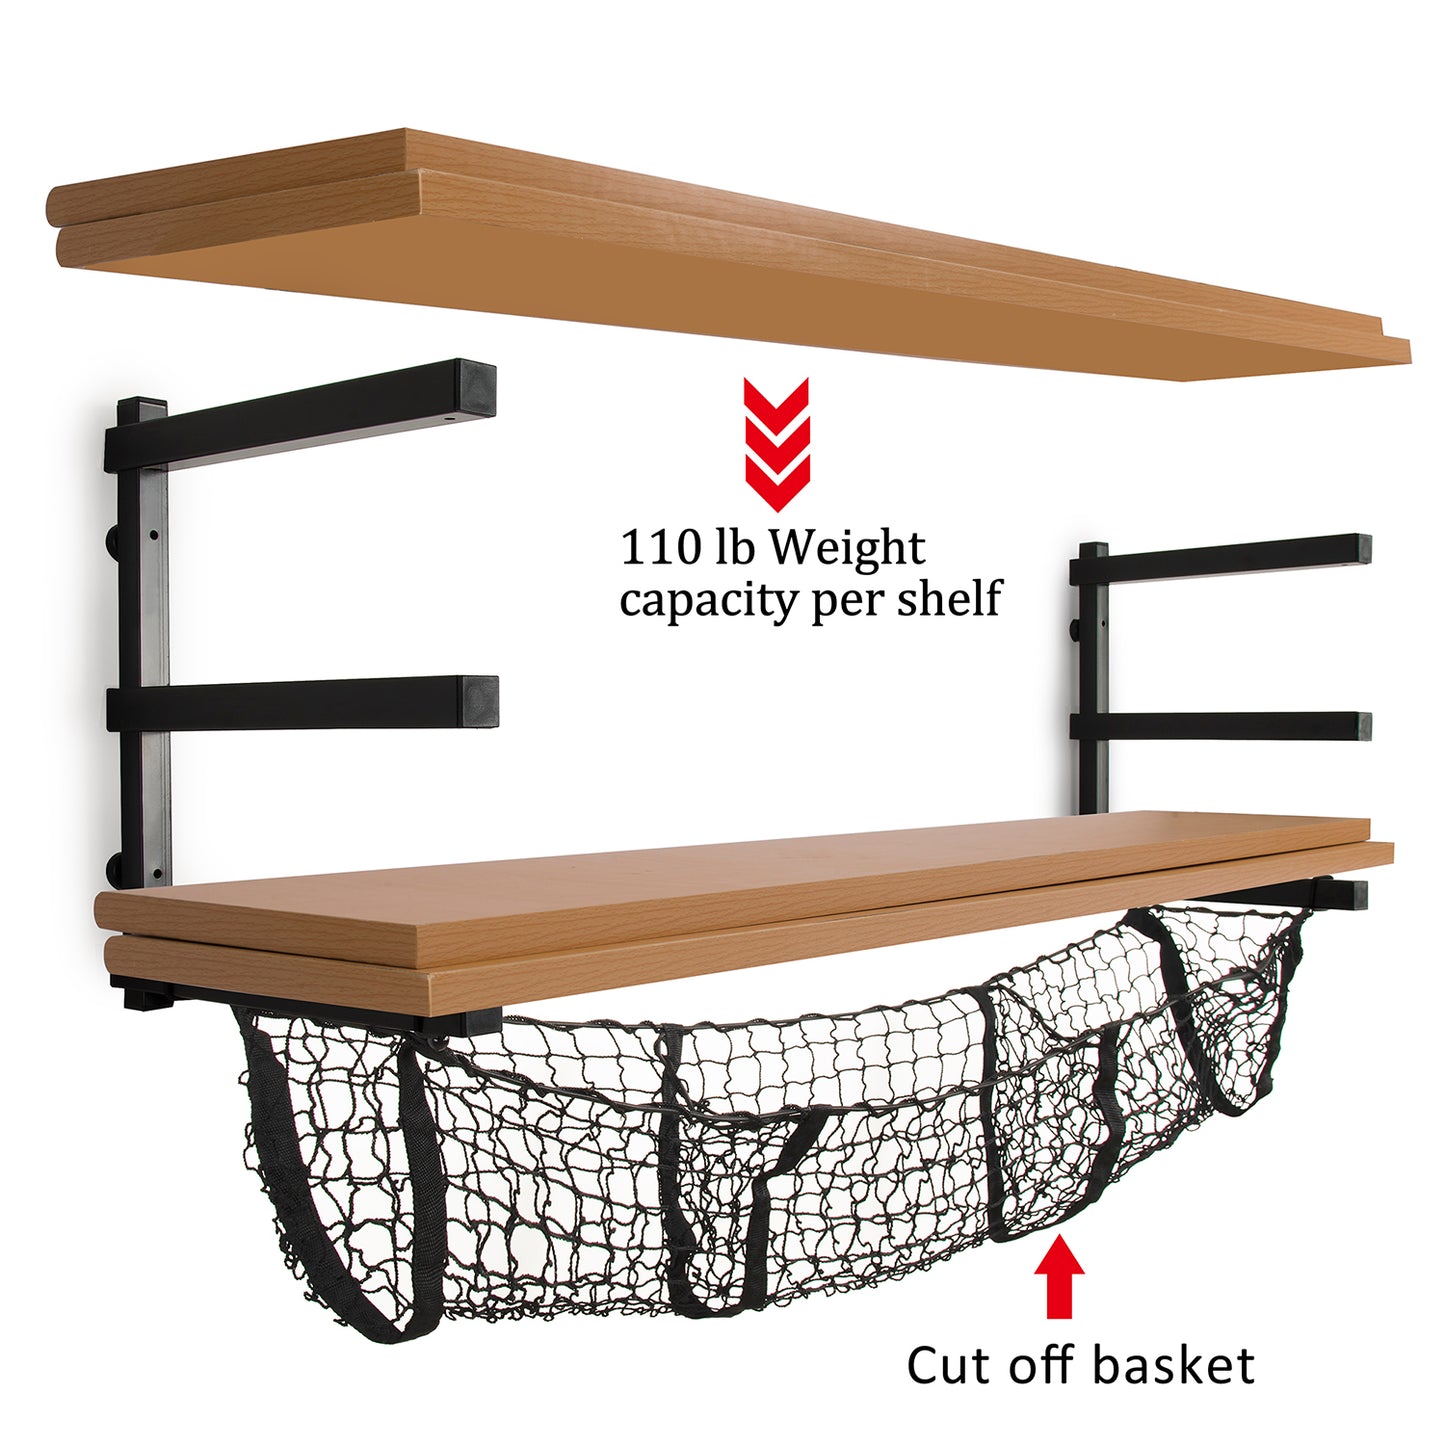 Lumber Rack Wood Storage Levels up to 260LBS Perfect for Wood Organized Including Cuts Off Basket Storage (2 Pack Lumber Rack)